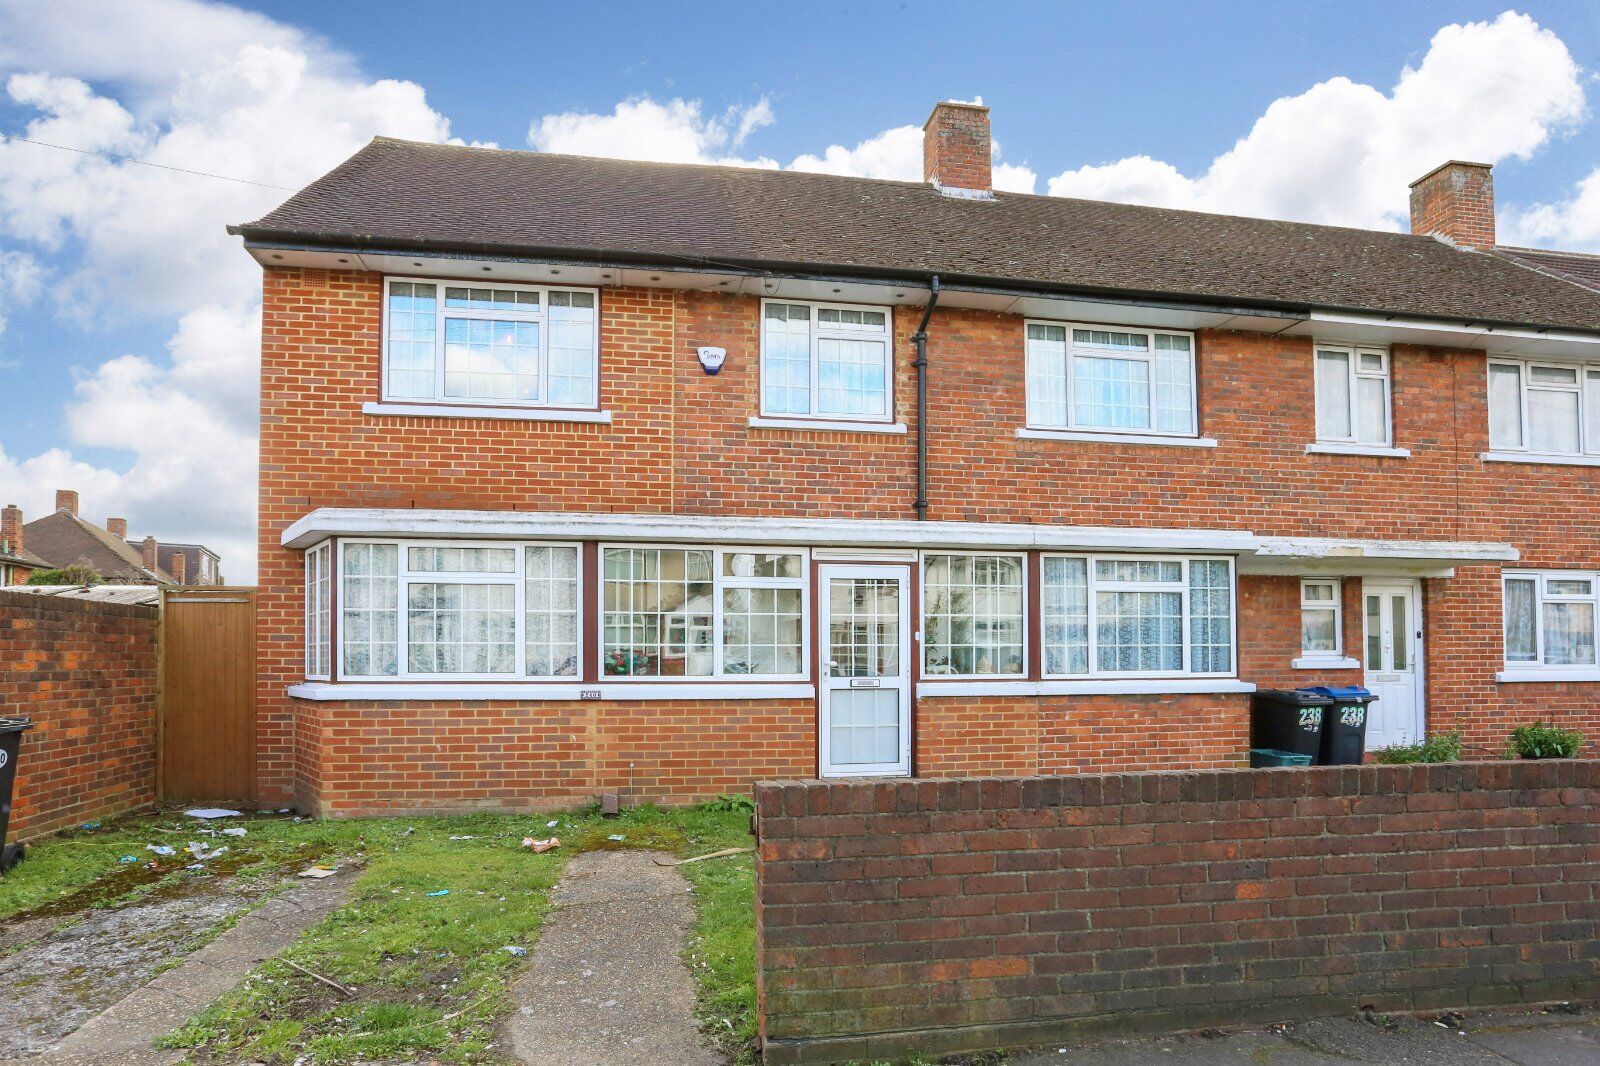 4 bedroom end terraced house for sale Tamworth Lane, Mitcham, CR4, main image